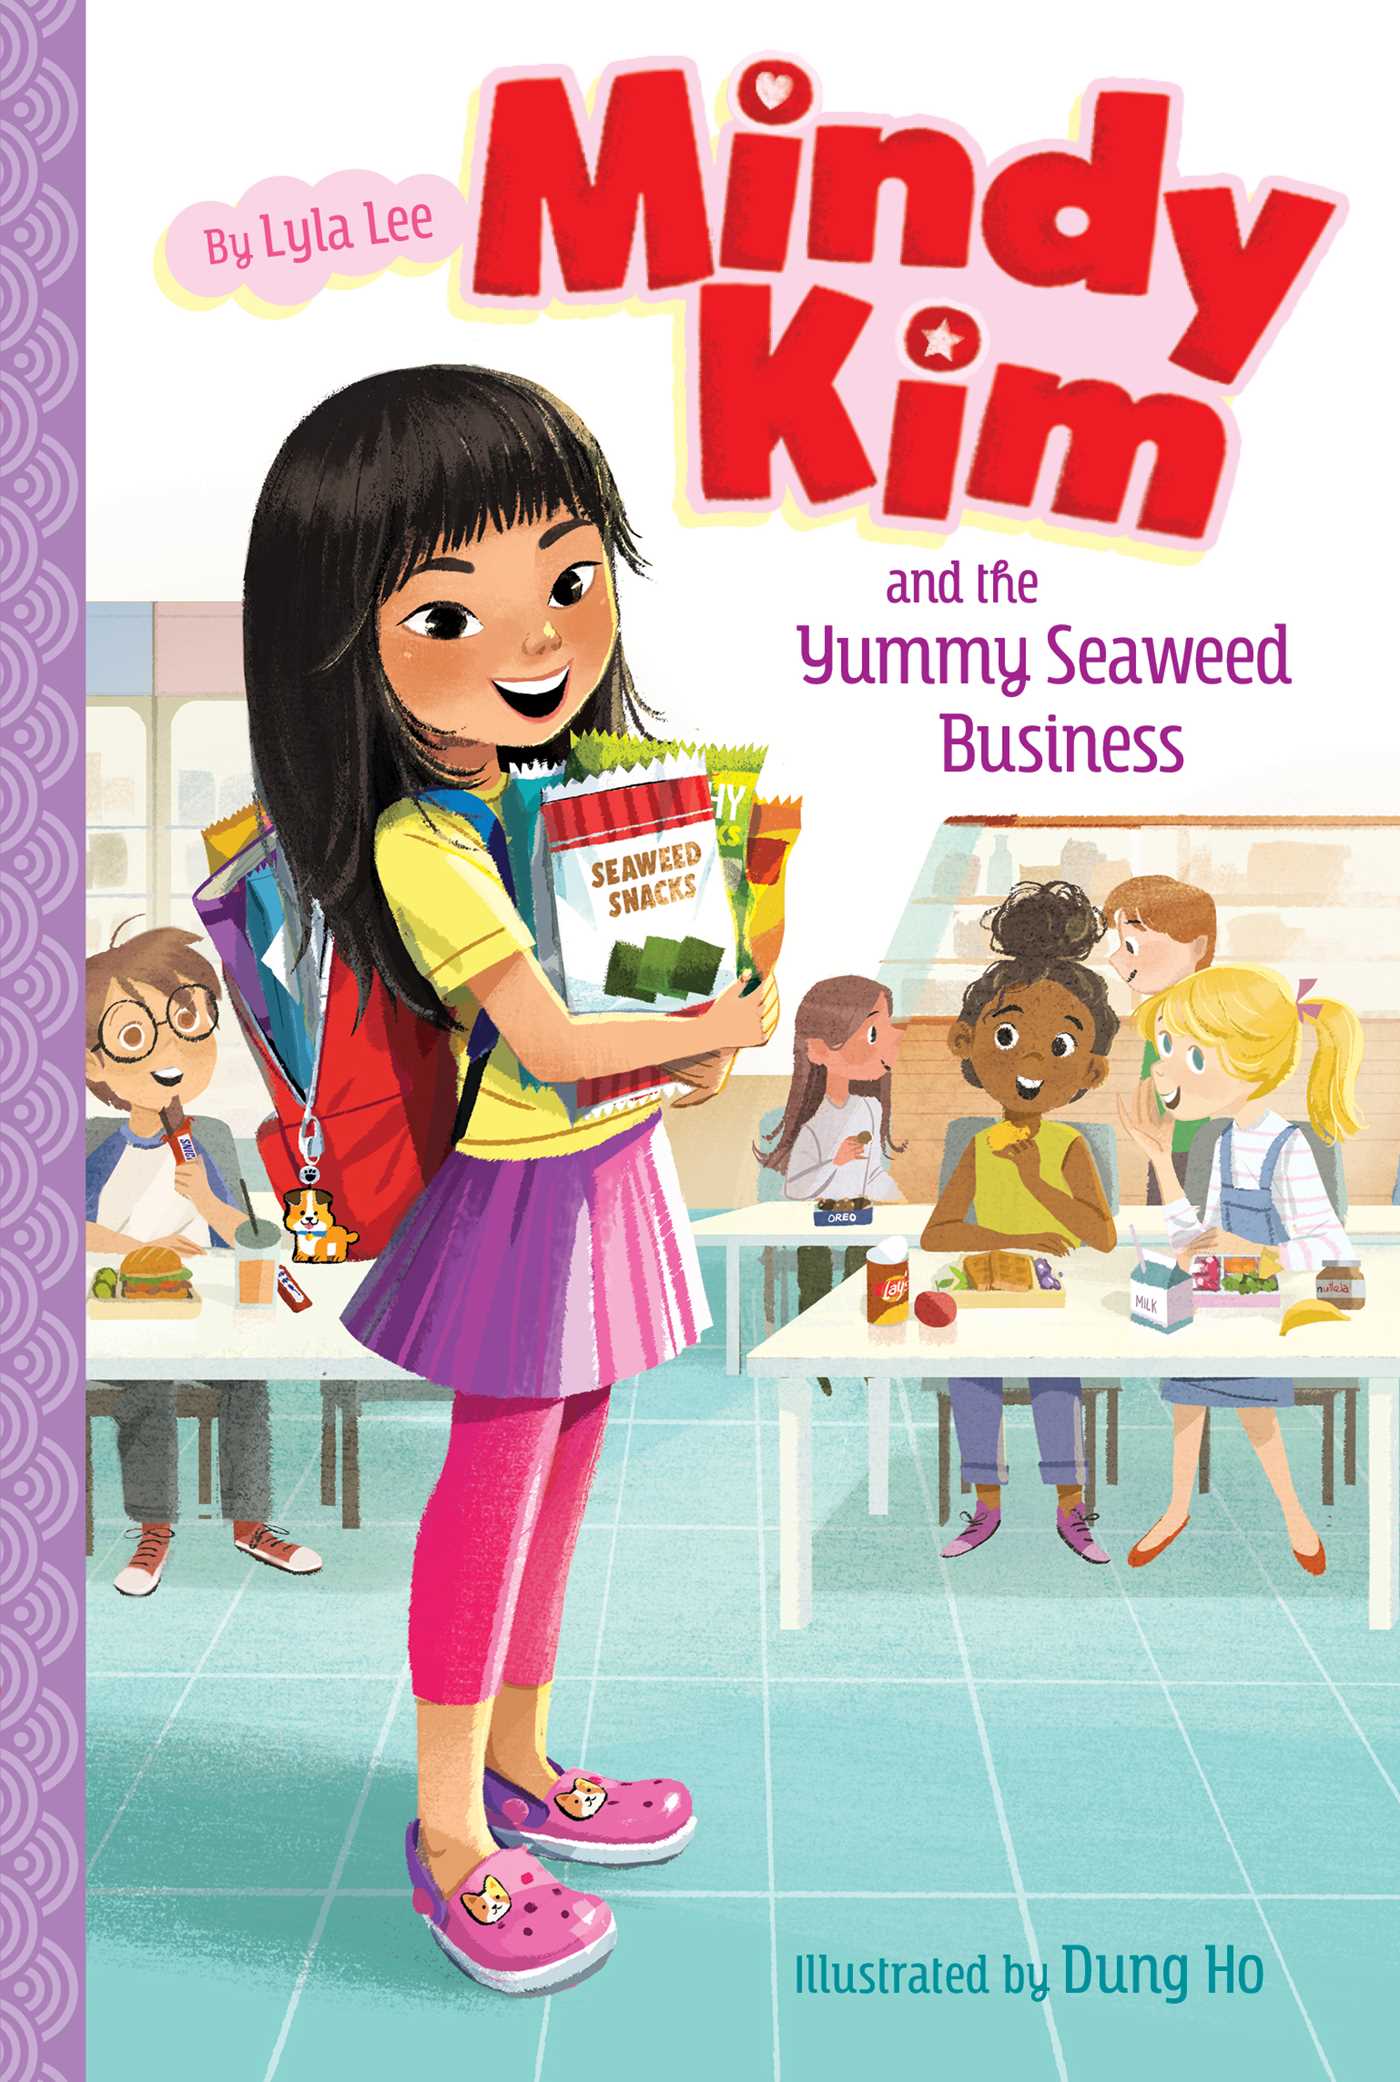 Cover of Mindy Kim and the Yummy Seaweed Business by Lyla Lee. Mindy is shown standing left of center wearing an overfull backpack and holding a bunch of bags of seaweed snacks. Other children sit at tables eating and talking in the background.